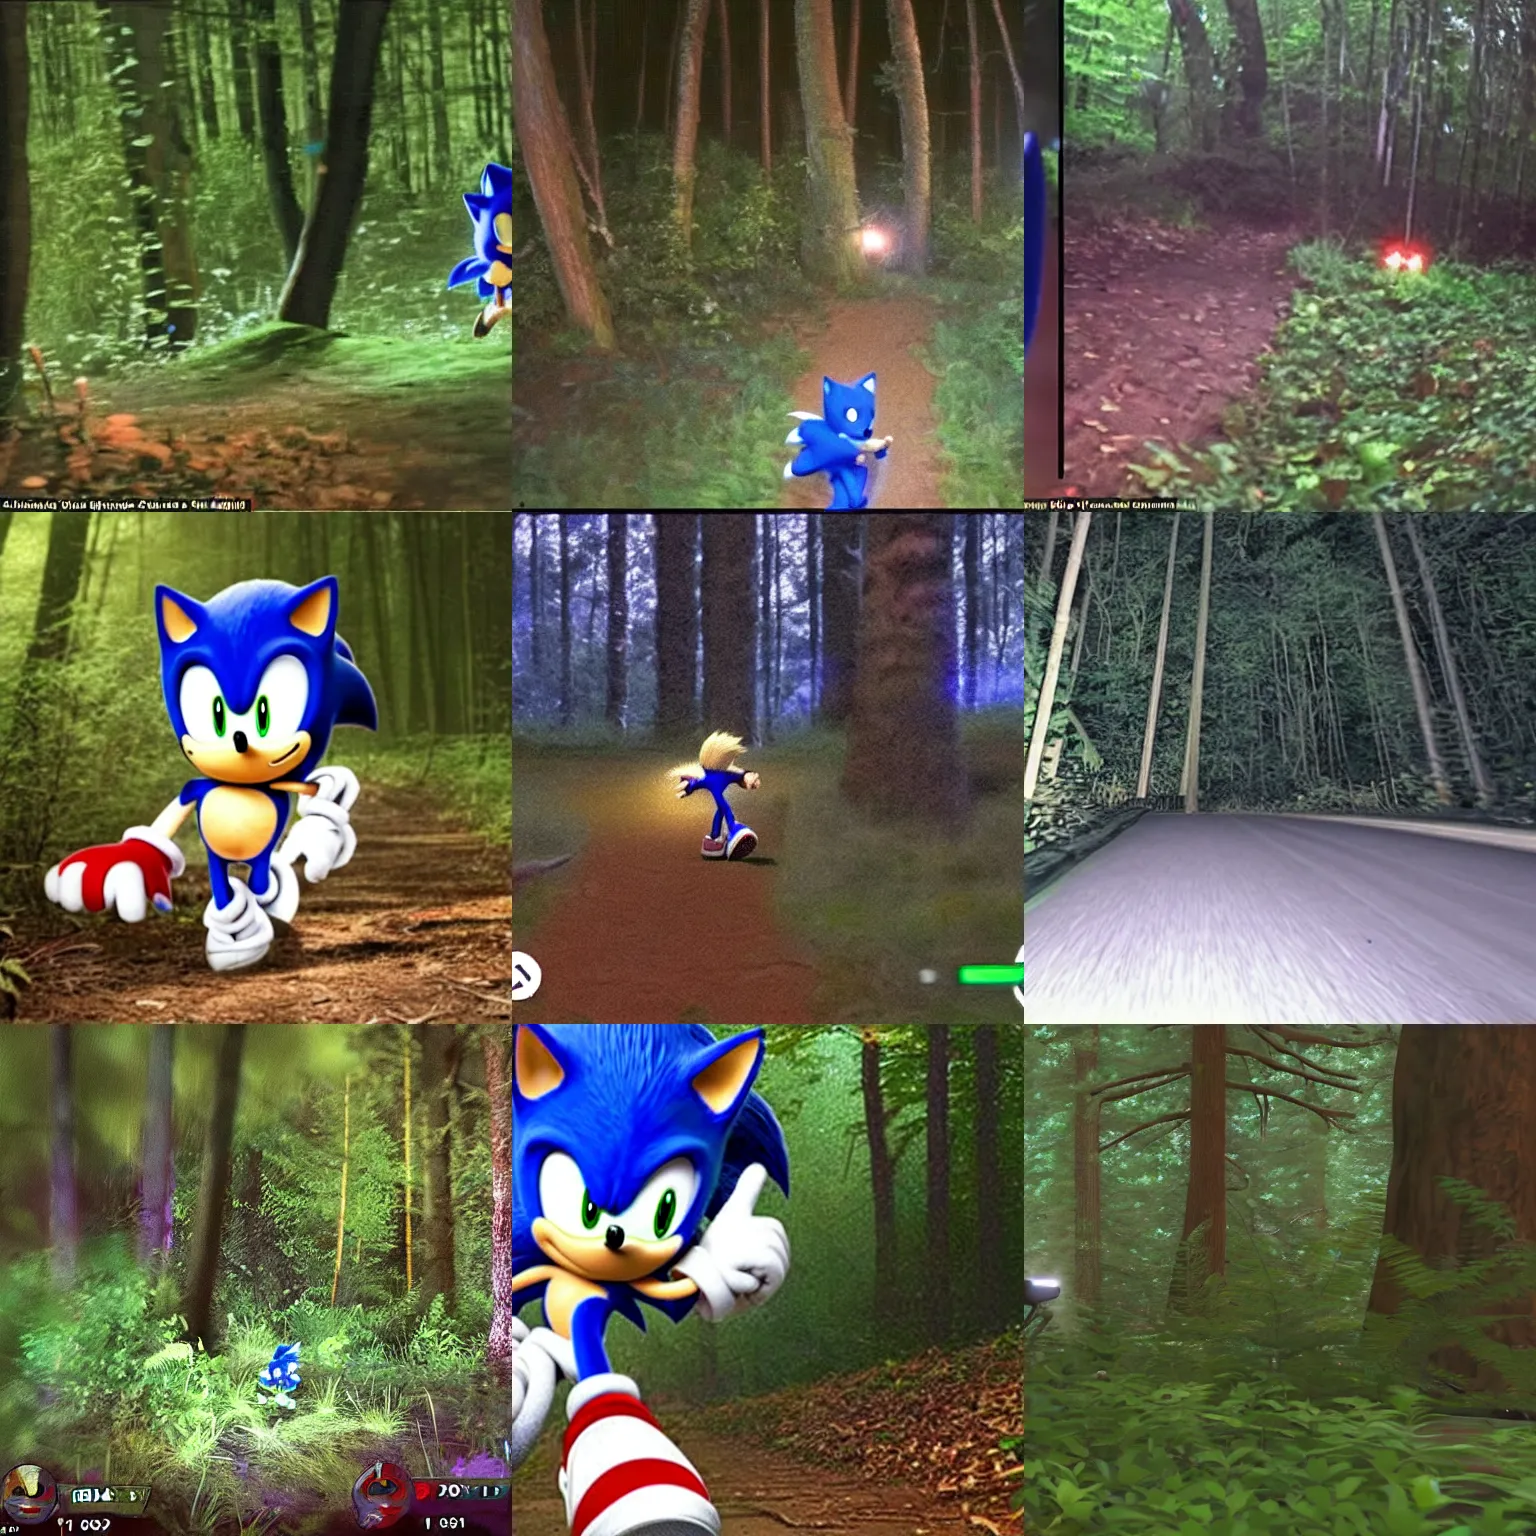 Prompt: sonic the hedgehog spotted in a forest at night, low-fidelity security camera footage